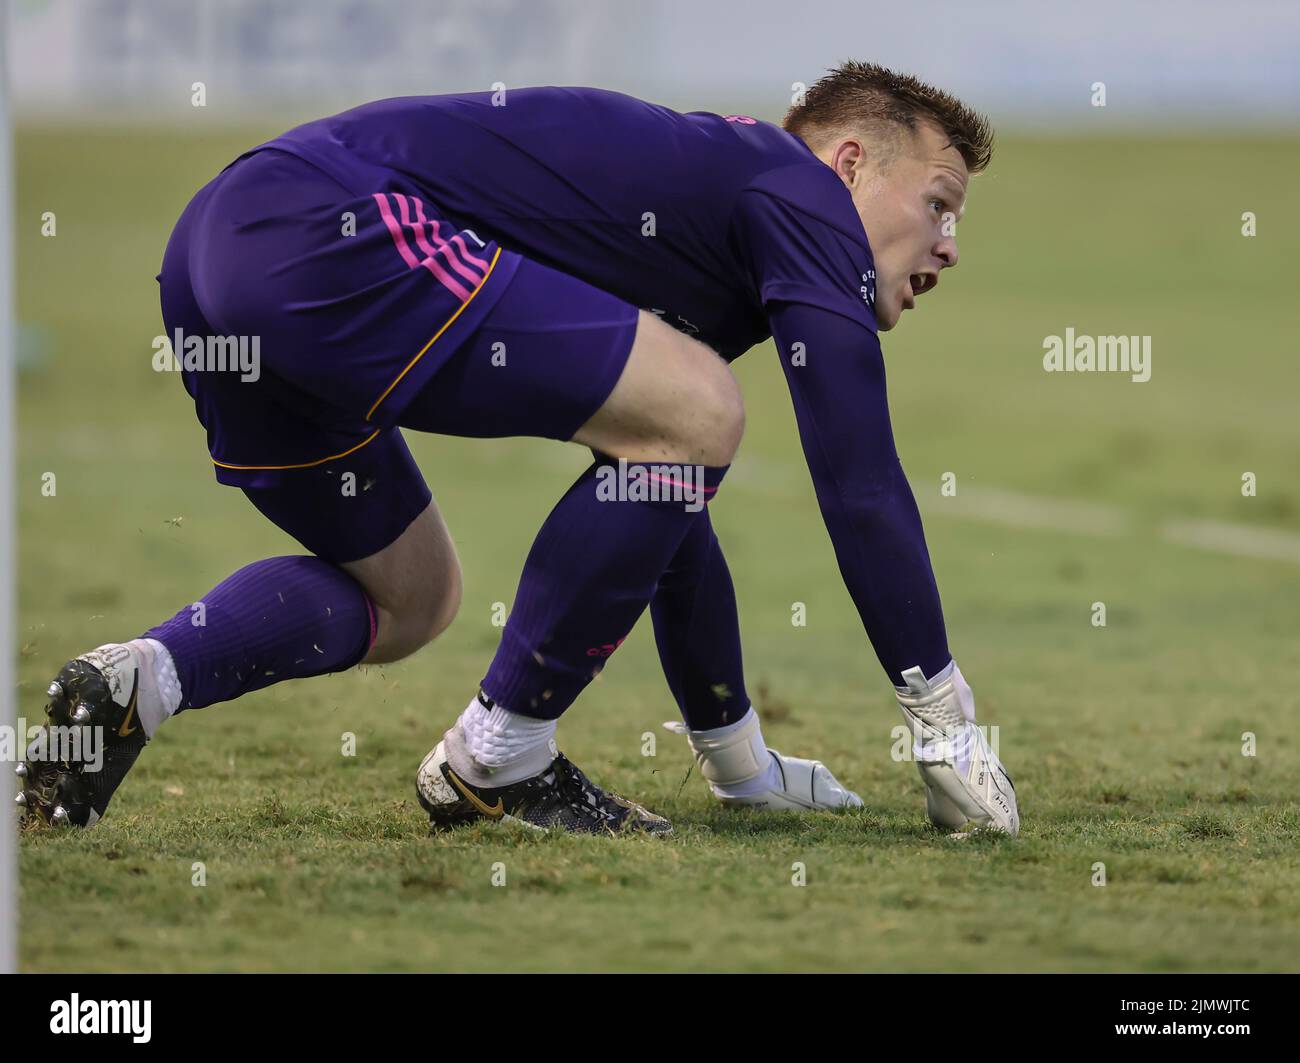 St. Petersburg, FL: Detroit City goalkeeper Nate Steinwascher (1) makes a save during a USL soccer game against the Tampa Bay Rowdies, Saturday, Augus Stock Photo